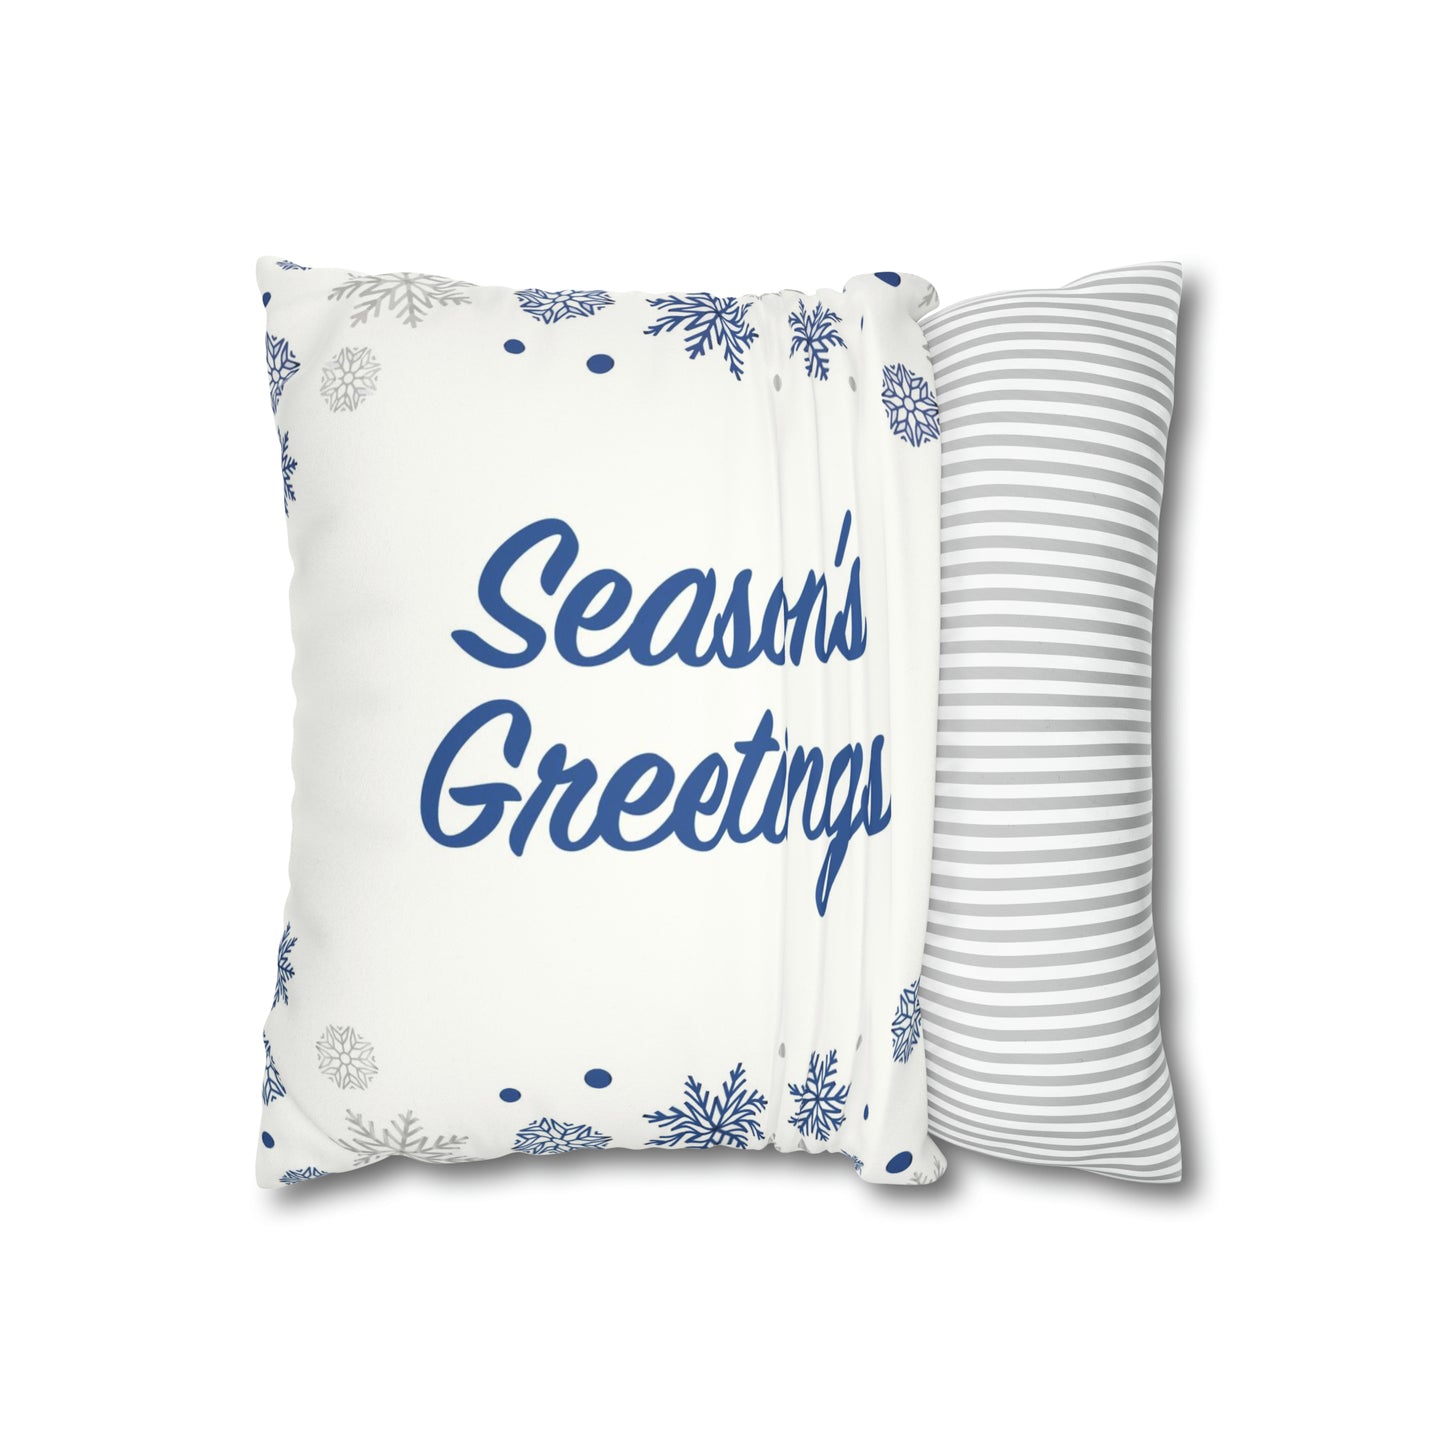 Season's Greetings Faux Suede Square Pillow Case, White